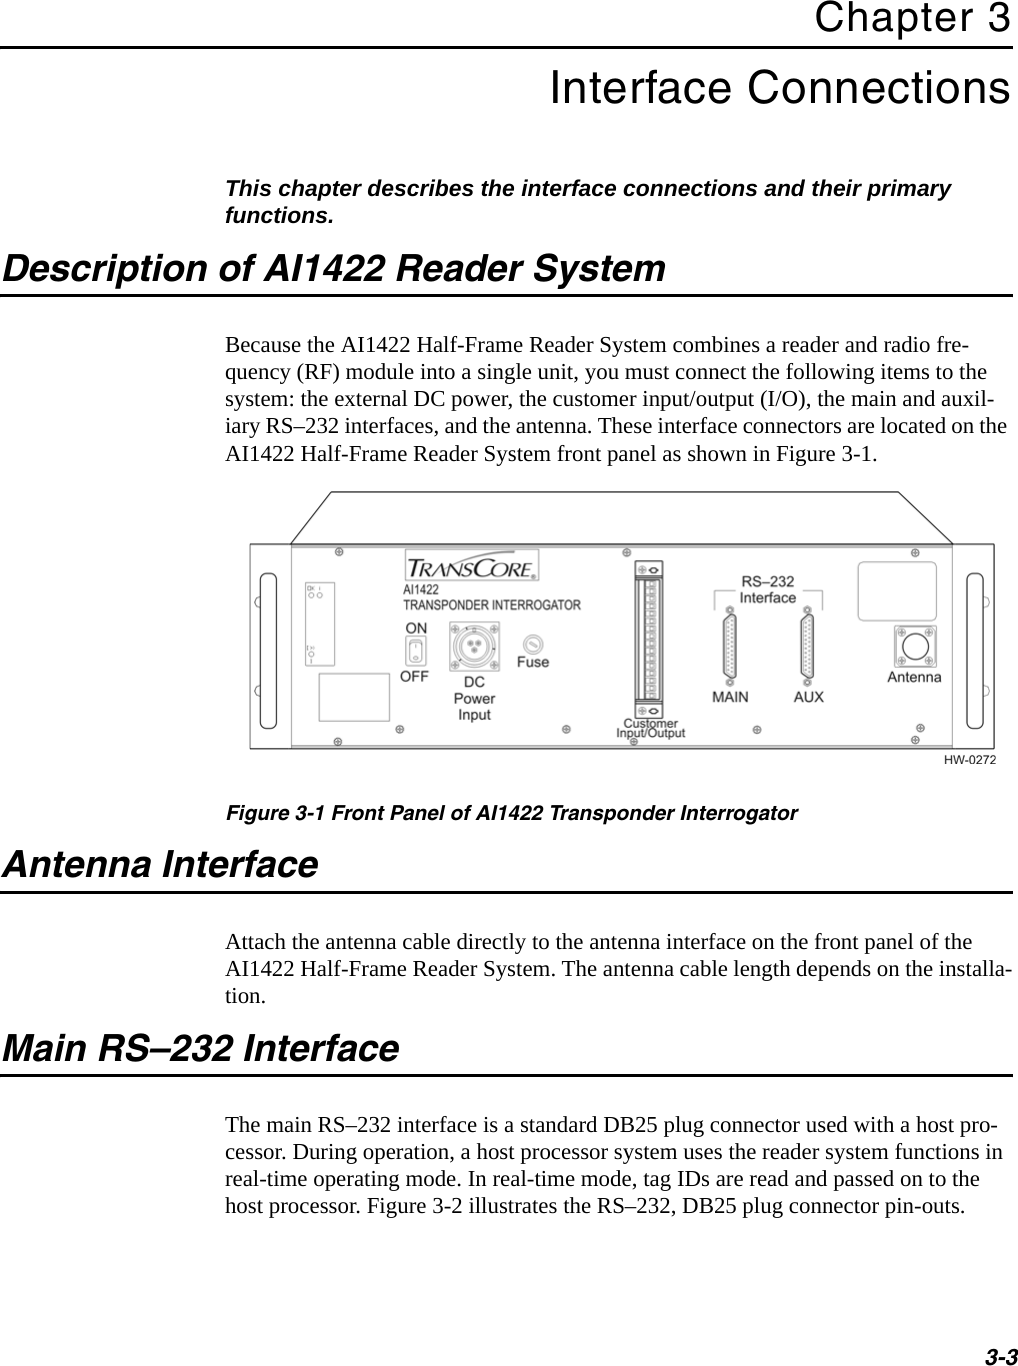 3-3Chapter 3Interface ConnectionsThis chapter describes the interface connections and their primary functions. Description of AI1422 Reader SystemBecause the AI1422 Half-Frame Reader System combines a reader and radio fre-quency (RF) module into a single unit, you must connect the following items to the system: the external DC power, the customer input/output (I/O), the main and auxil-iary RS–232 interfaces, and the antenna. These interface connectors are located on the AI1422 Half-Frame Reader System front panel as shown in Figure 3-1.Figure 3-1 Front Panel of AI1422 Transponder InterrogatorAntenna InterfaceAttach the antenna cable directly to the antenna interface on the front panel of the AI1422 Half-Frame Reader System. The antenna cable length depends on the installa-tion.Main RS–232 InterfaceThe main RS–232 interface is a standard DB25 plug connector used with a host pro-cessor. During operation, a host processor system uses the reader system functions in real-time operating mode. In real-time mode, tag IDs are read and passed on to the host processor. Figure 3-2 illustrates the RS–232, DB25 plug connector pin-outs.